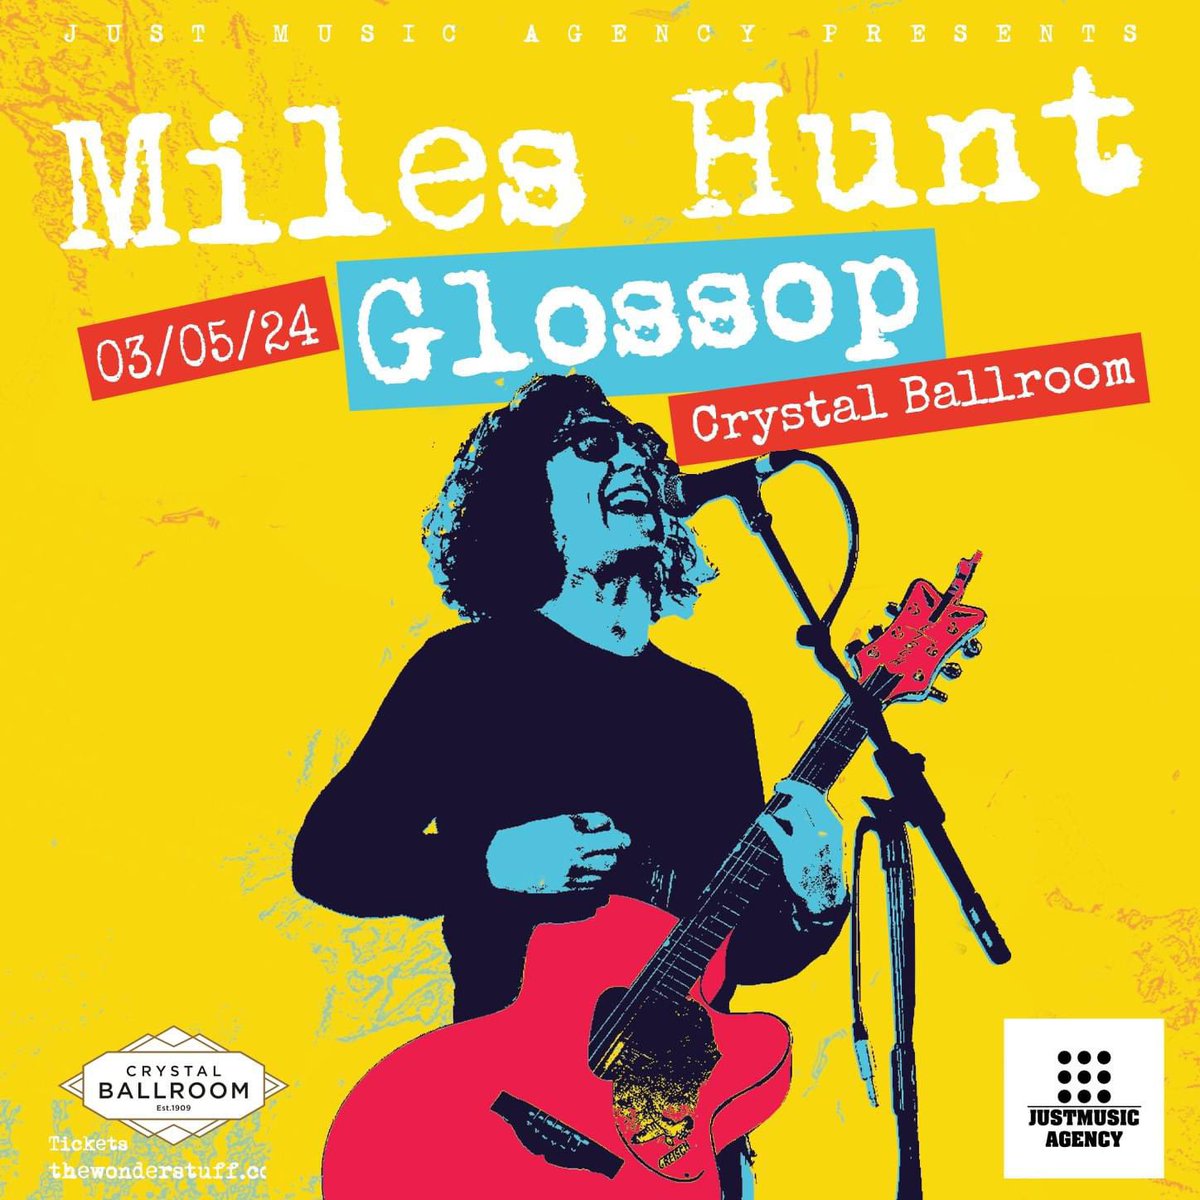 Have I mentioned this previously?

I’m playing at The Crystal Ballroom in Glossop in a couple of weeks time.

Fancy it? 😁